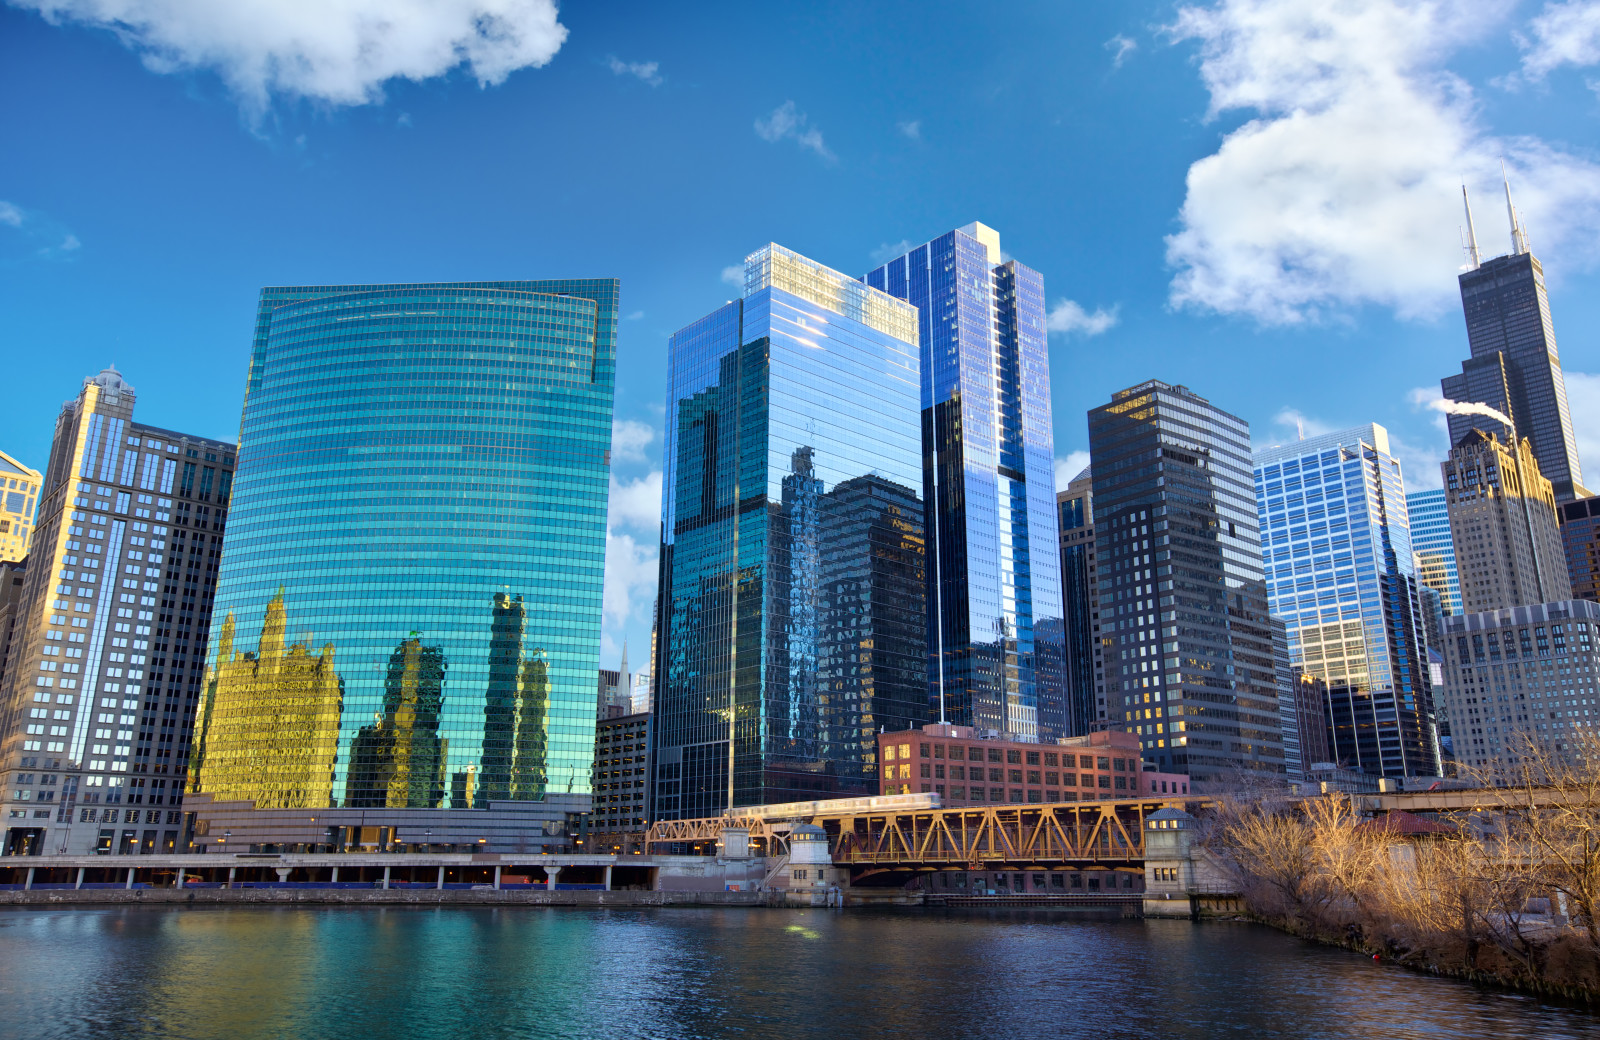 Chicago Loop skyline and Chicago River, IL, United States